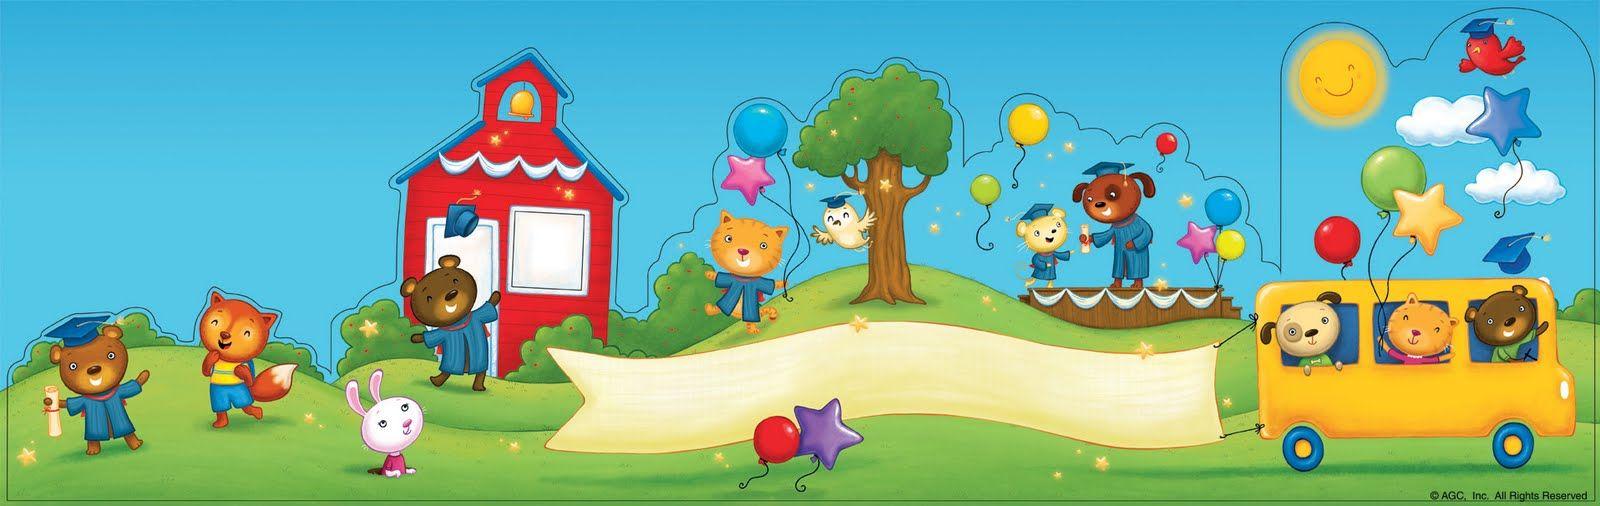 Kindergarten Wall Decoration Image collections Wall